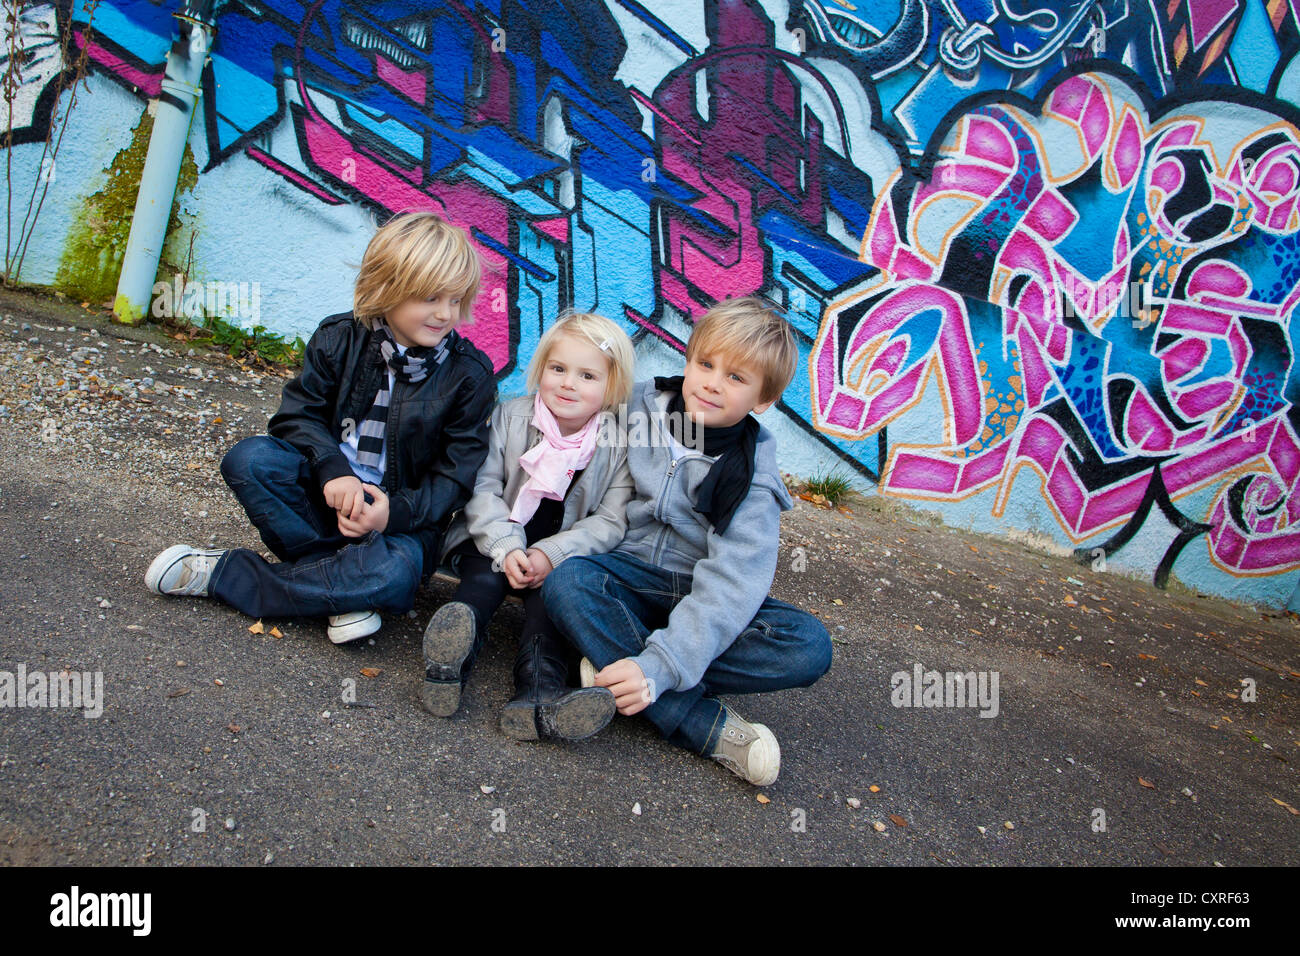 Siblings, 2, 5 and 7 years old, sitting on a skateboard in front of a wall with graffiti Stock Photo